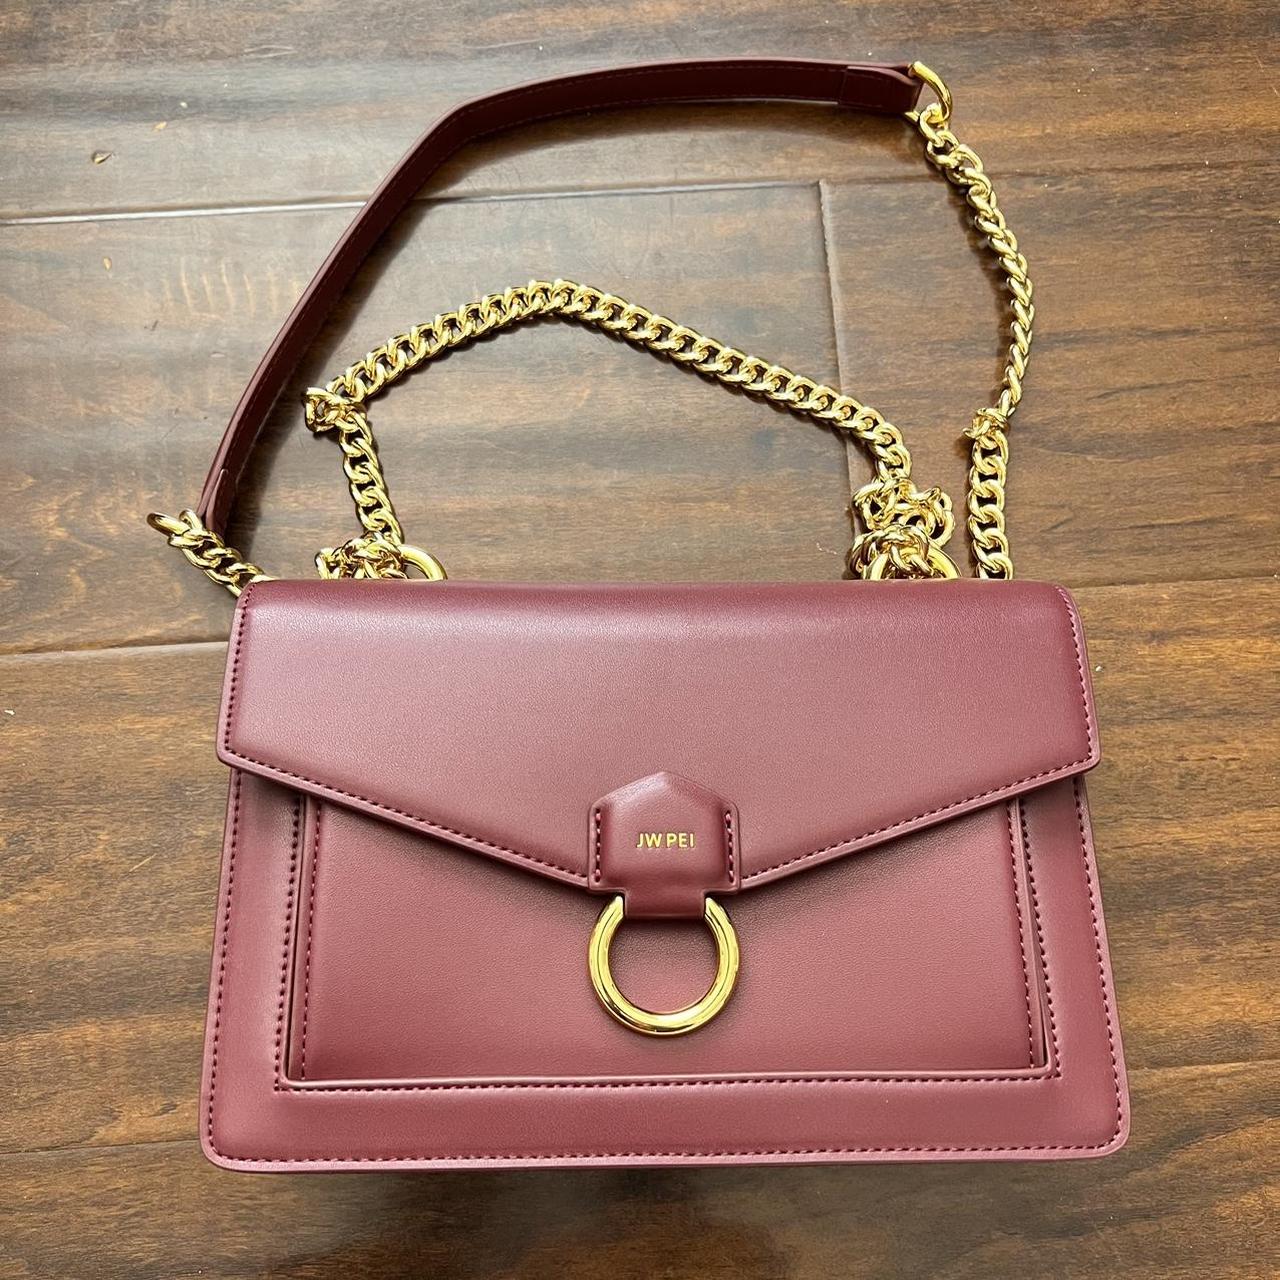 REVIEW* VEGAN Leather! Friday by JW Pei Envelope Chain Crossbody